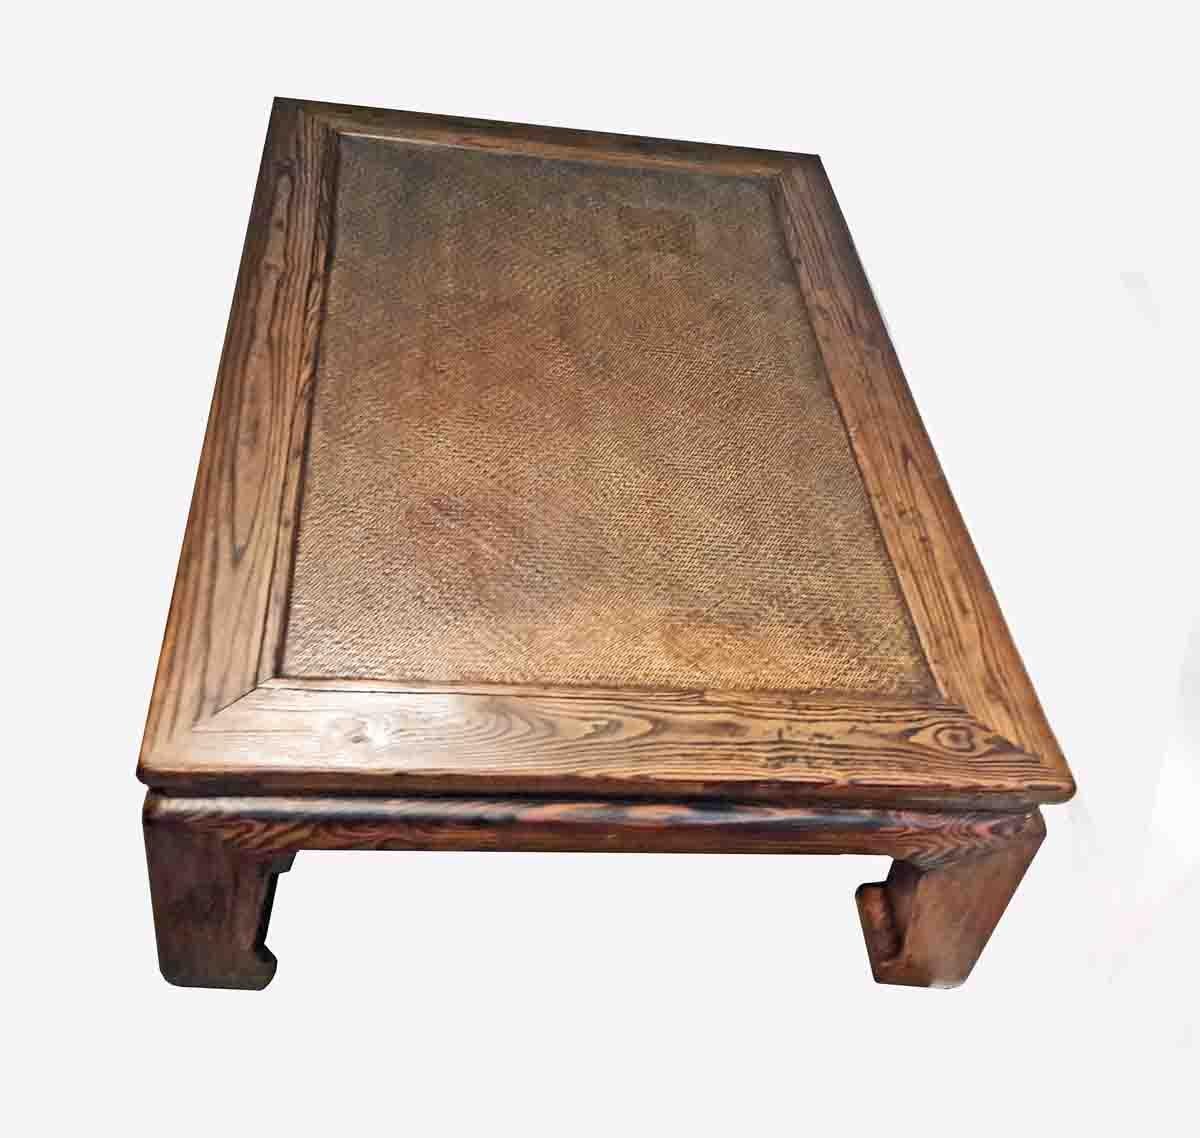 A rectangular coffee table with corner legs and textured center made of Northern elmwood (Jamu). China, late 19th century.